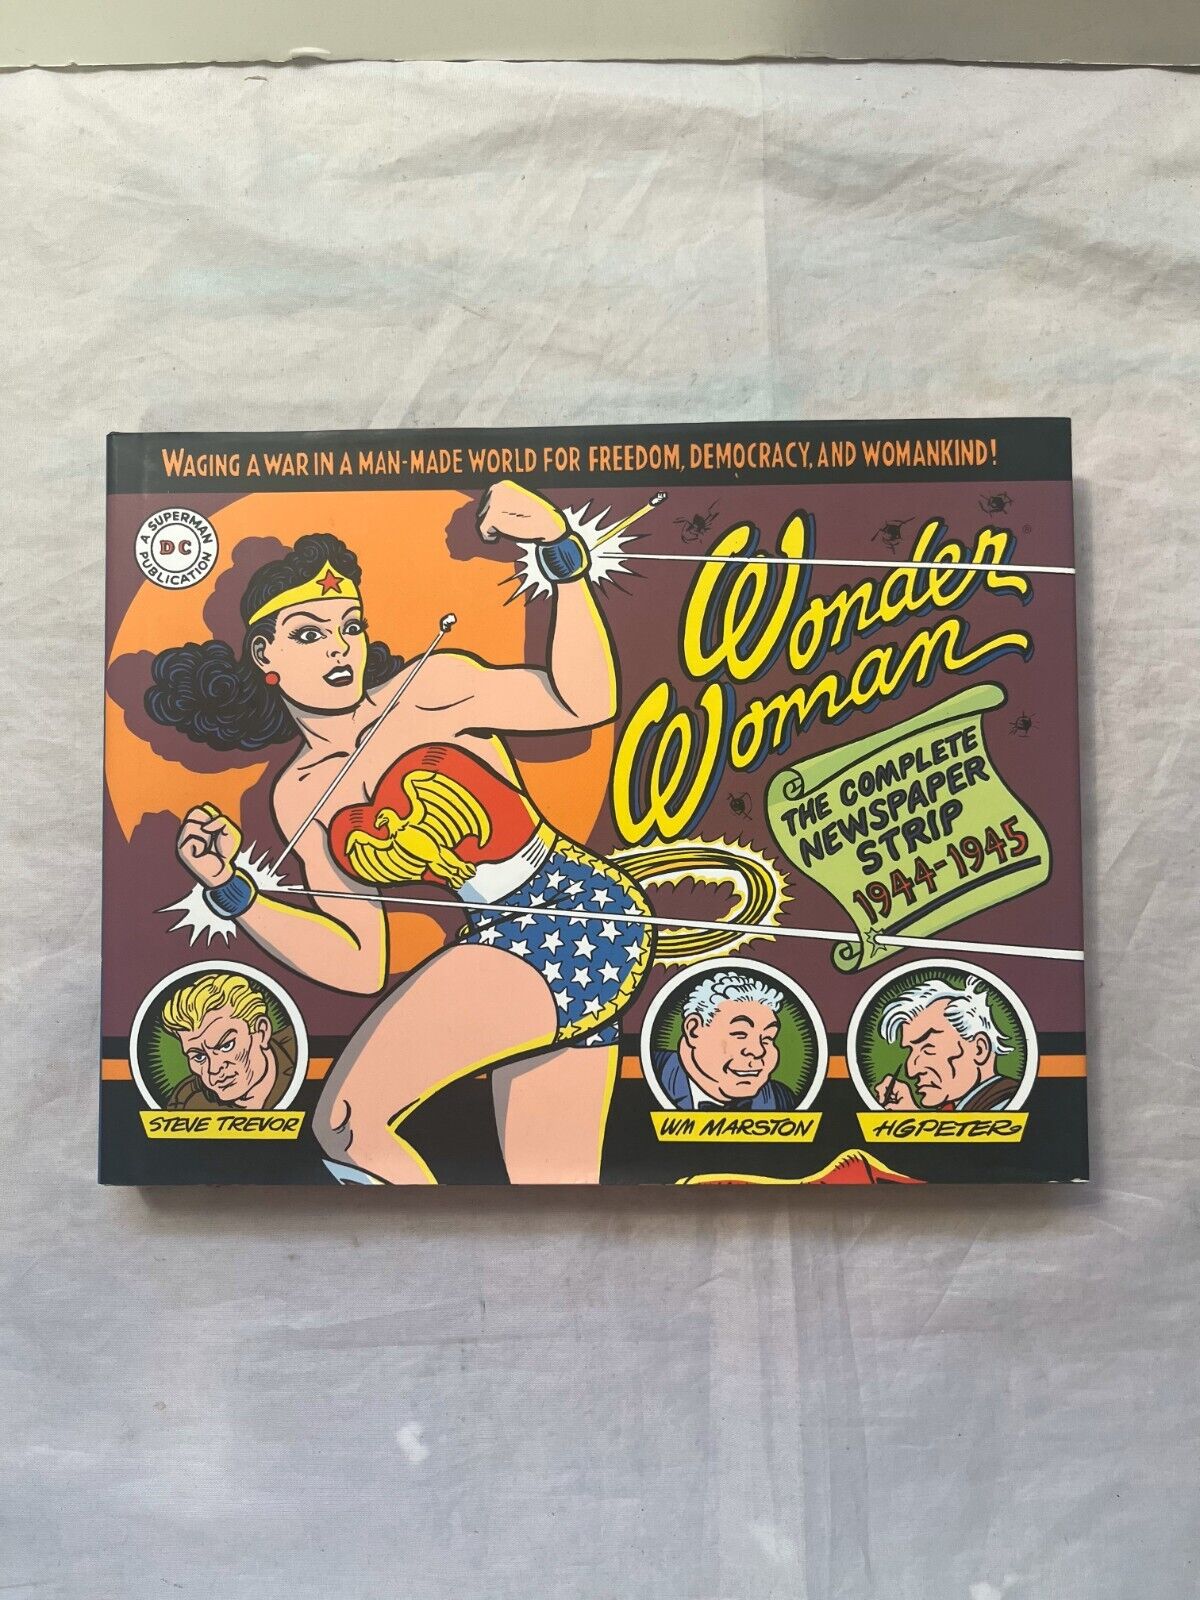 Wonder Woman (New): The Daily Comics The Complete Newspaper Strip 1944-1945